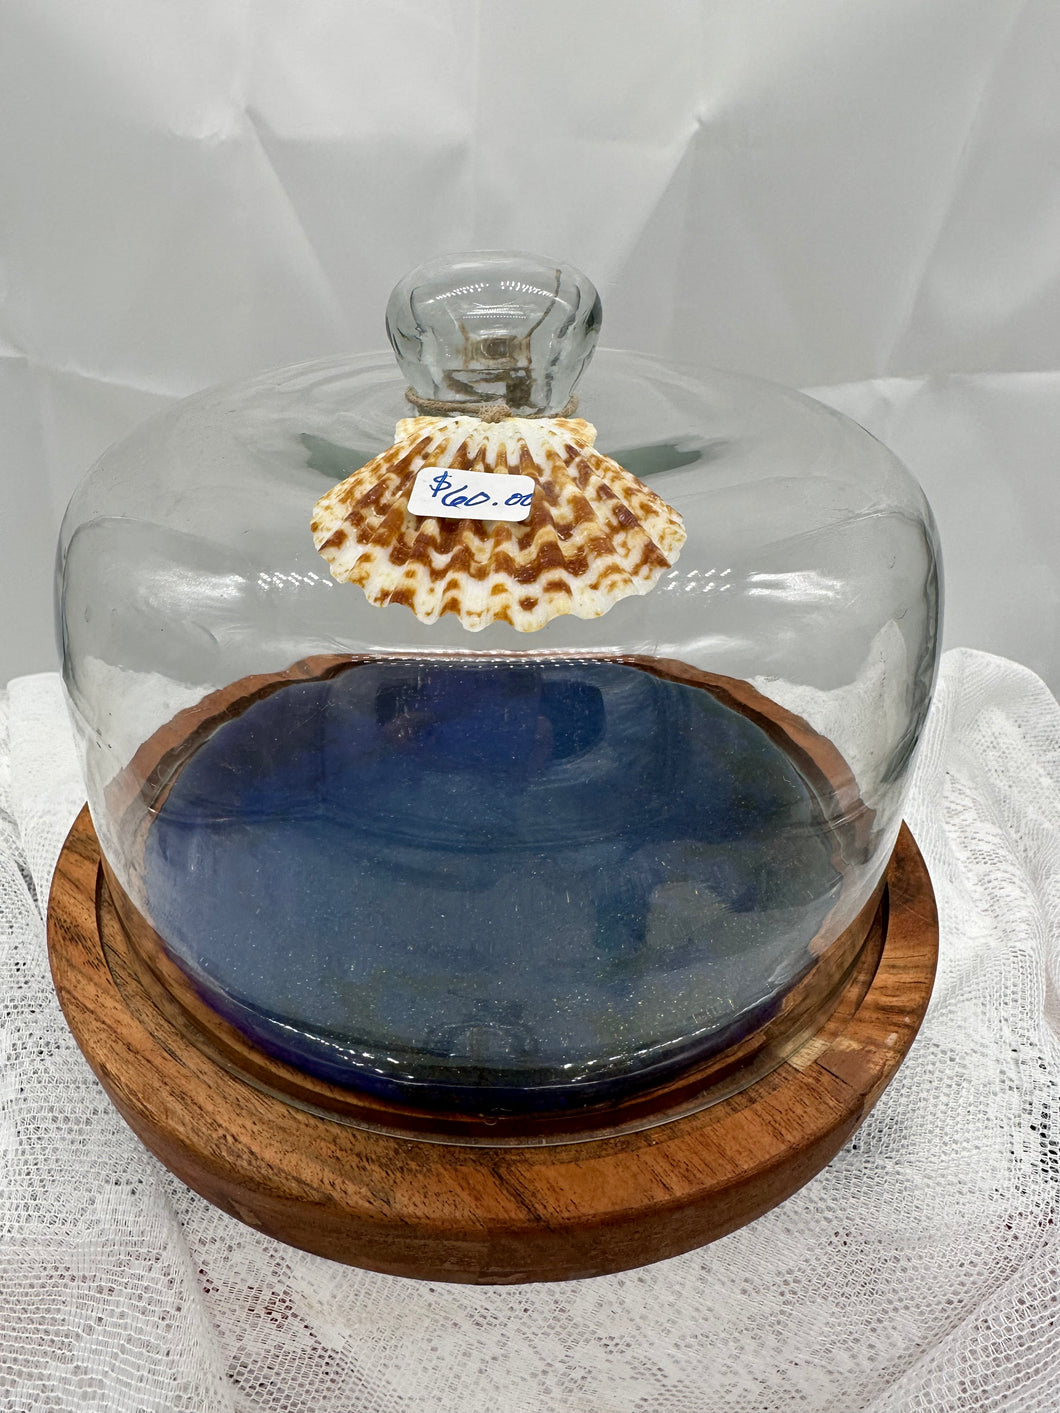 Iridescent blue glass dessert display/adorned with shell